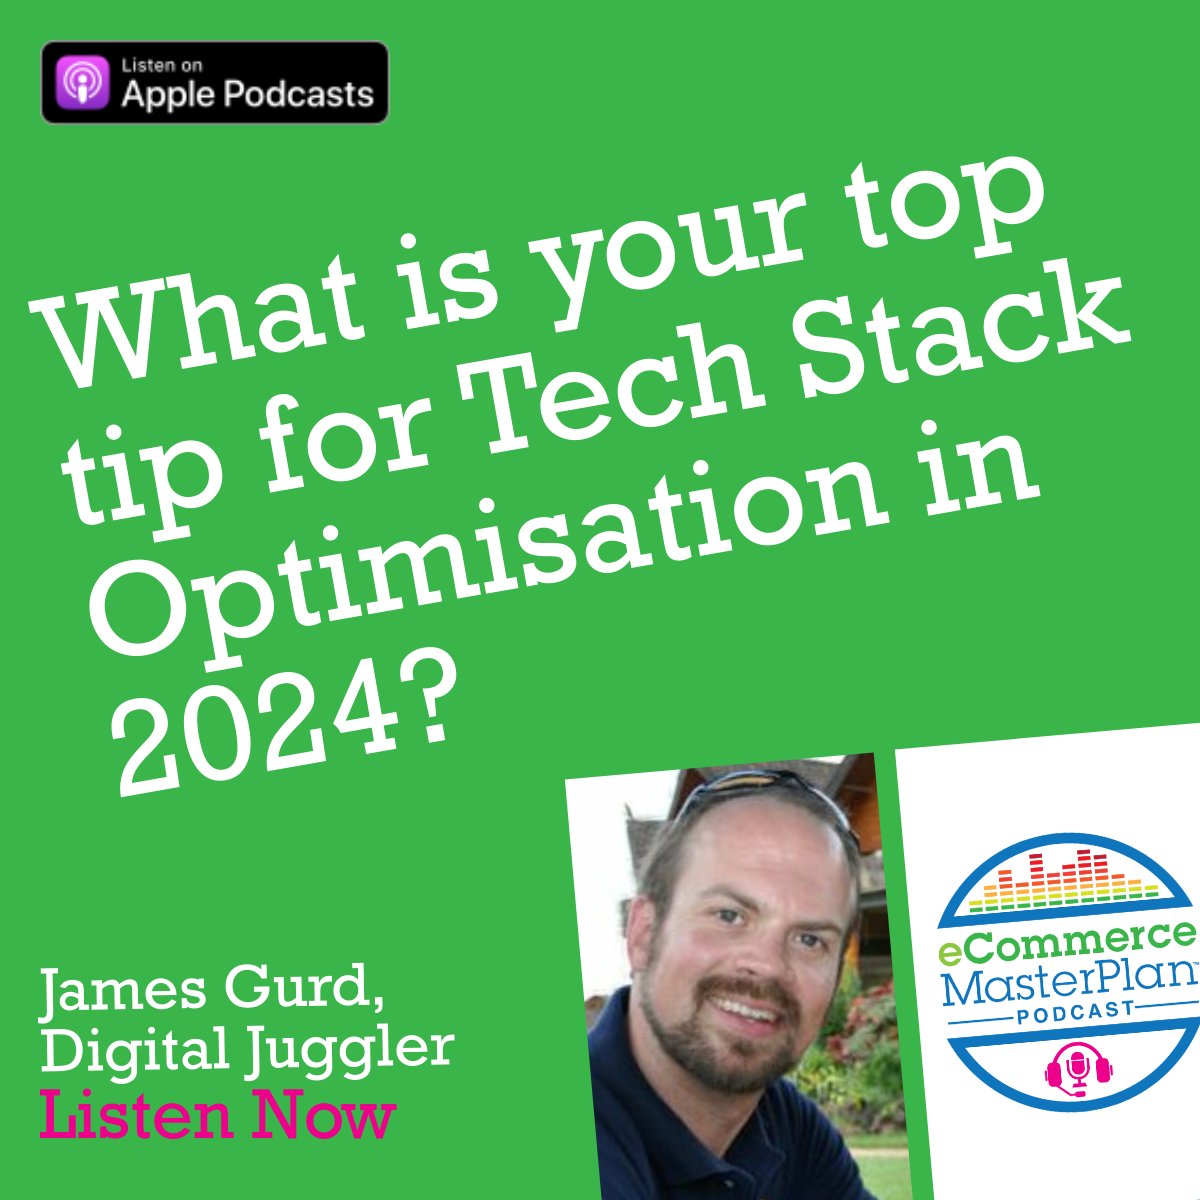 Hear James‘s full Top Tip for Tech Stack Optimisation in 2024 now! Listen on Apple Podcasts, Spotify or ecommercemasterplan.com/tech-stack-opt… @jamesgurd